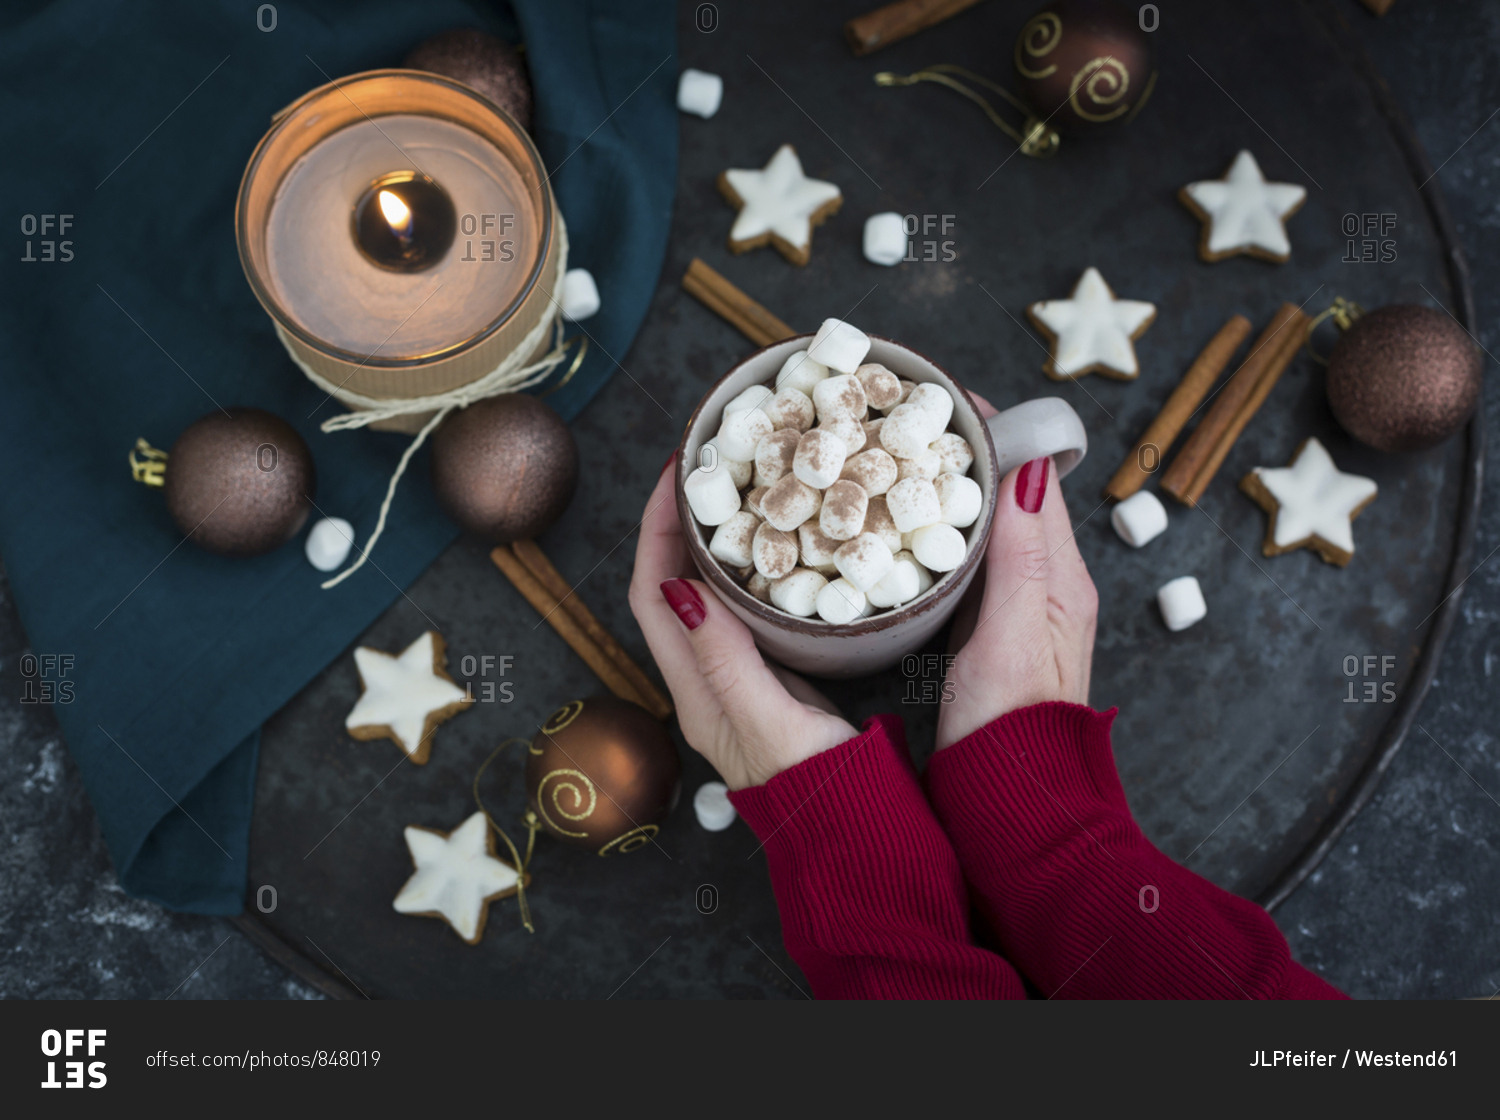 Woman's hands holding cup of Hot Chocolate with marshmallows at Christmas time